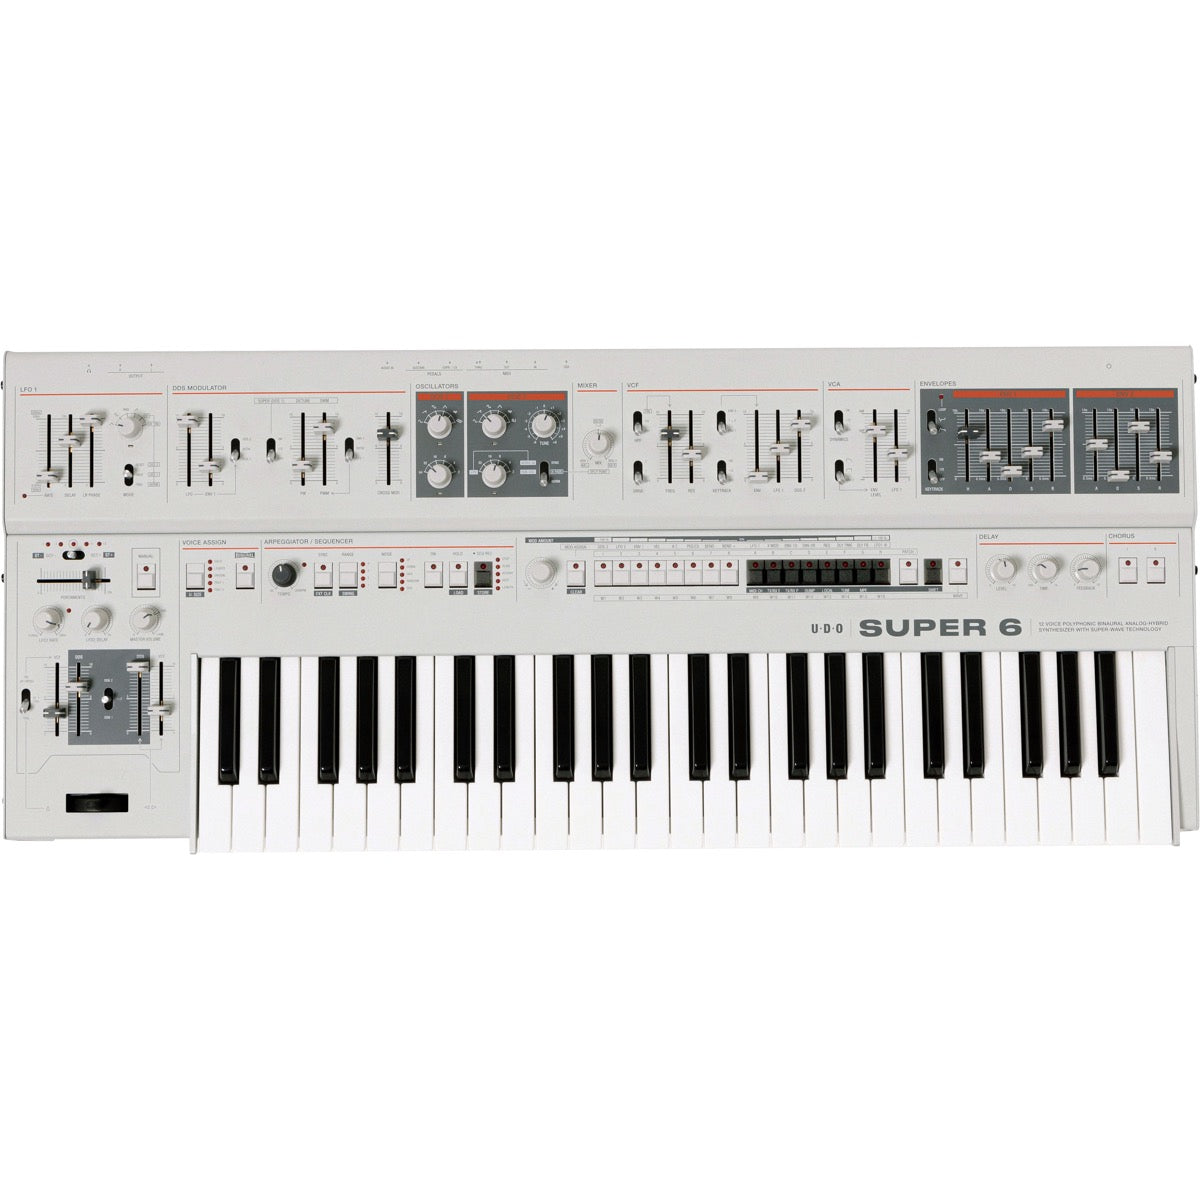 UDO Audio Super 6 12-Voice Polyphonic Keyboard Synthesizer - White View 1